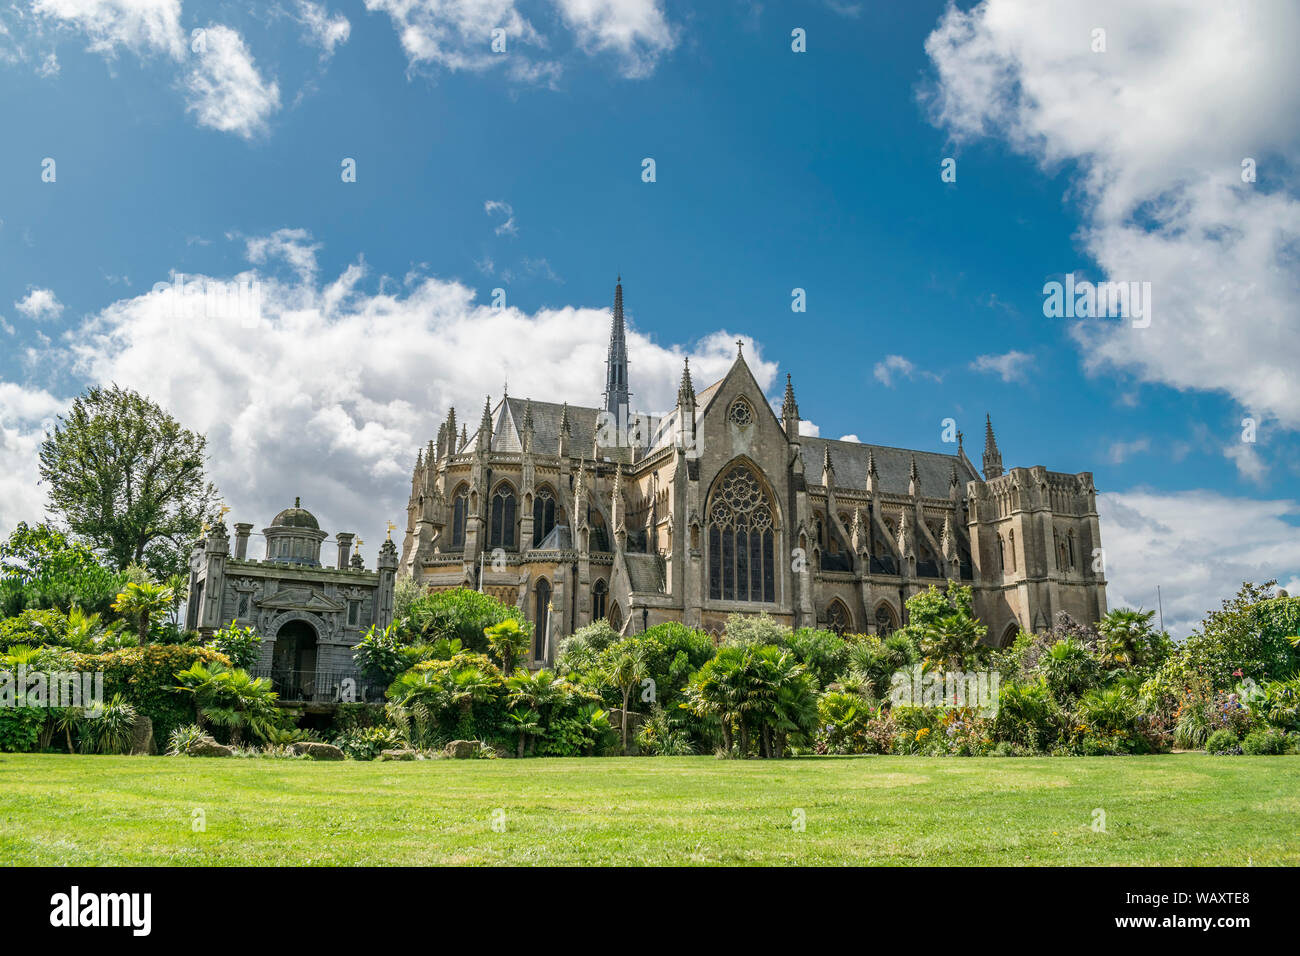 Arundel Cathedral on a english summer's day, taken from the gardens of Arundel Castle. located Parsons hill, Arundel, West Sussex, England. Stock Photo